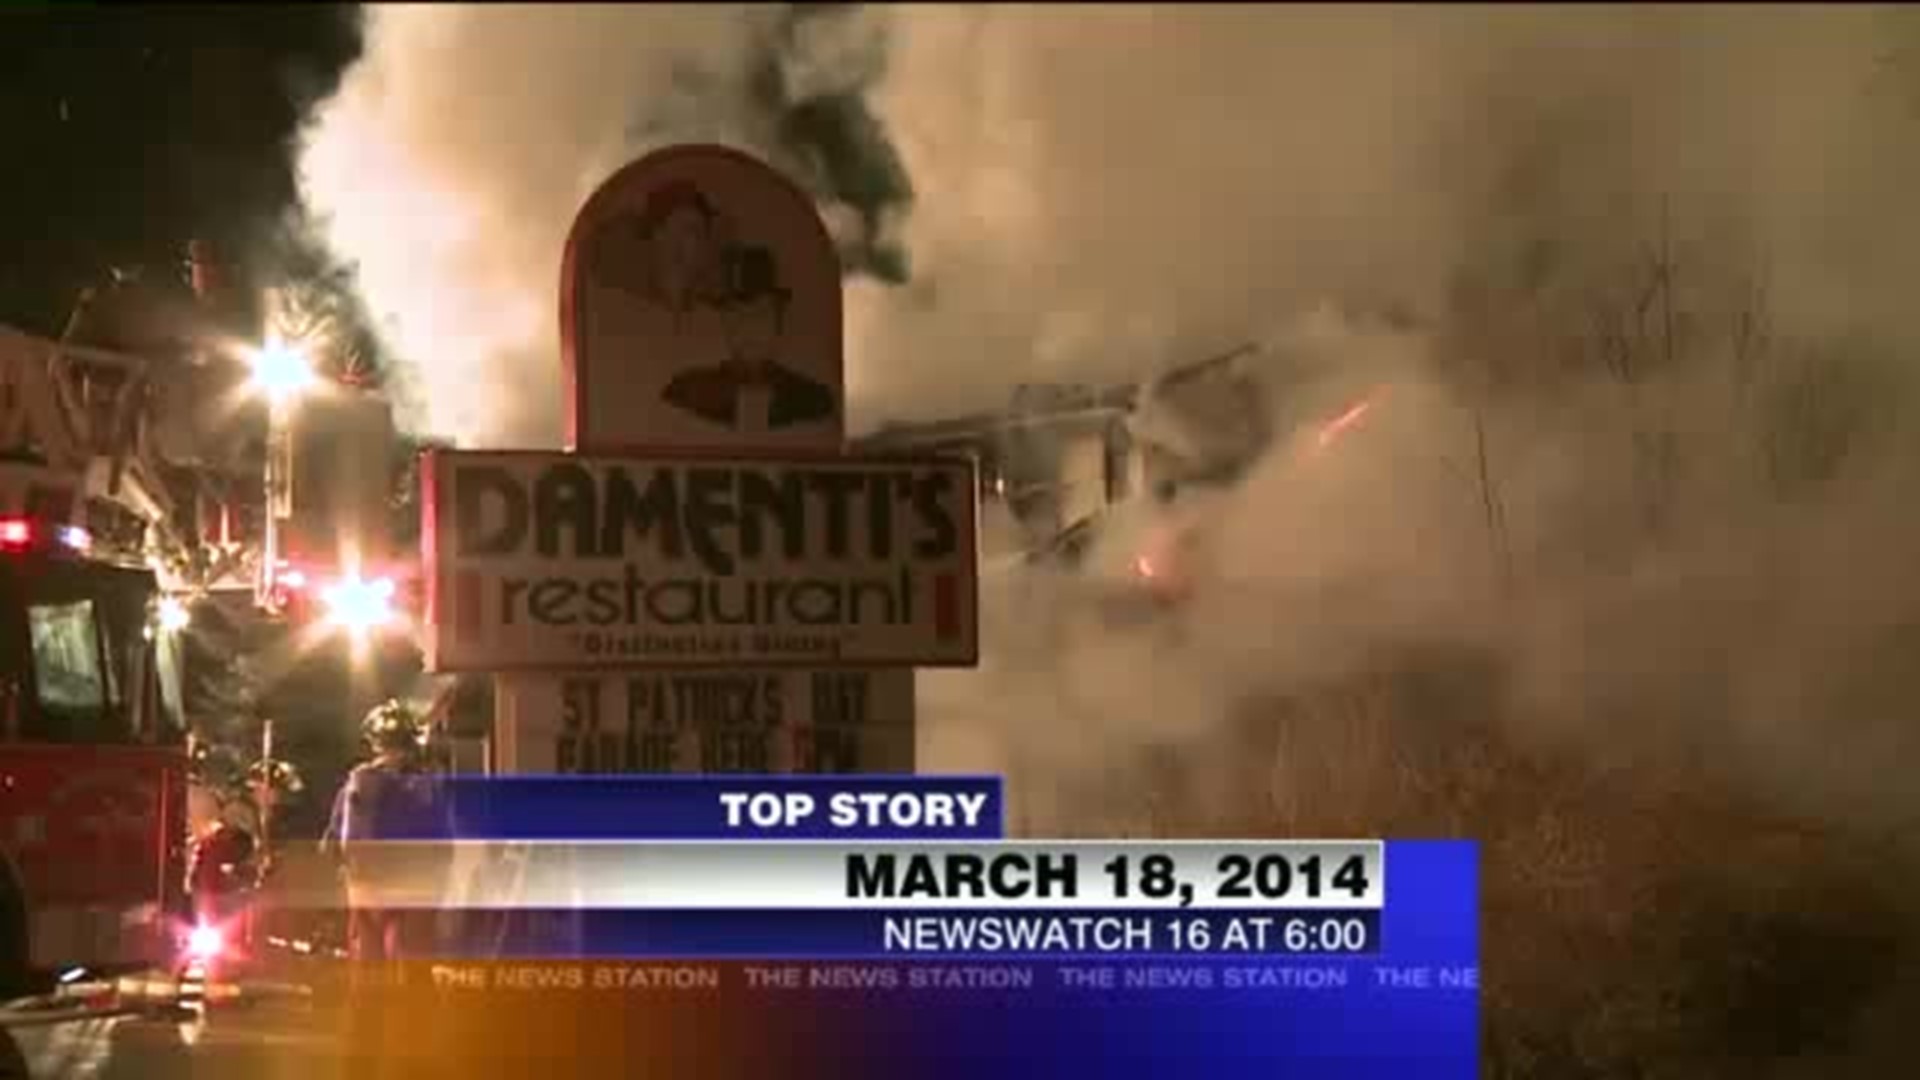 Fate of Damenti’s Restaurant Unclear After Fire